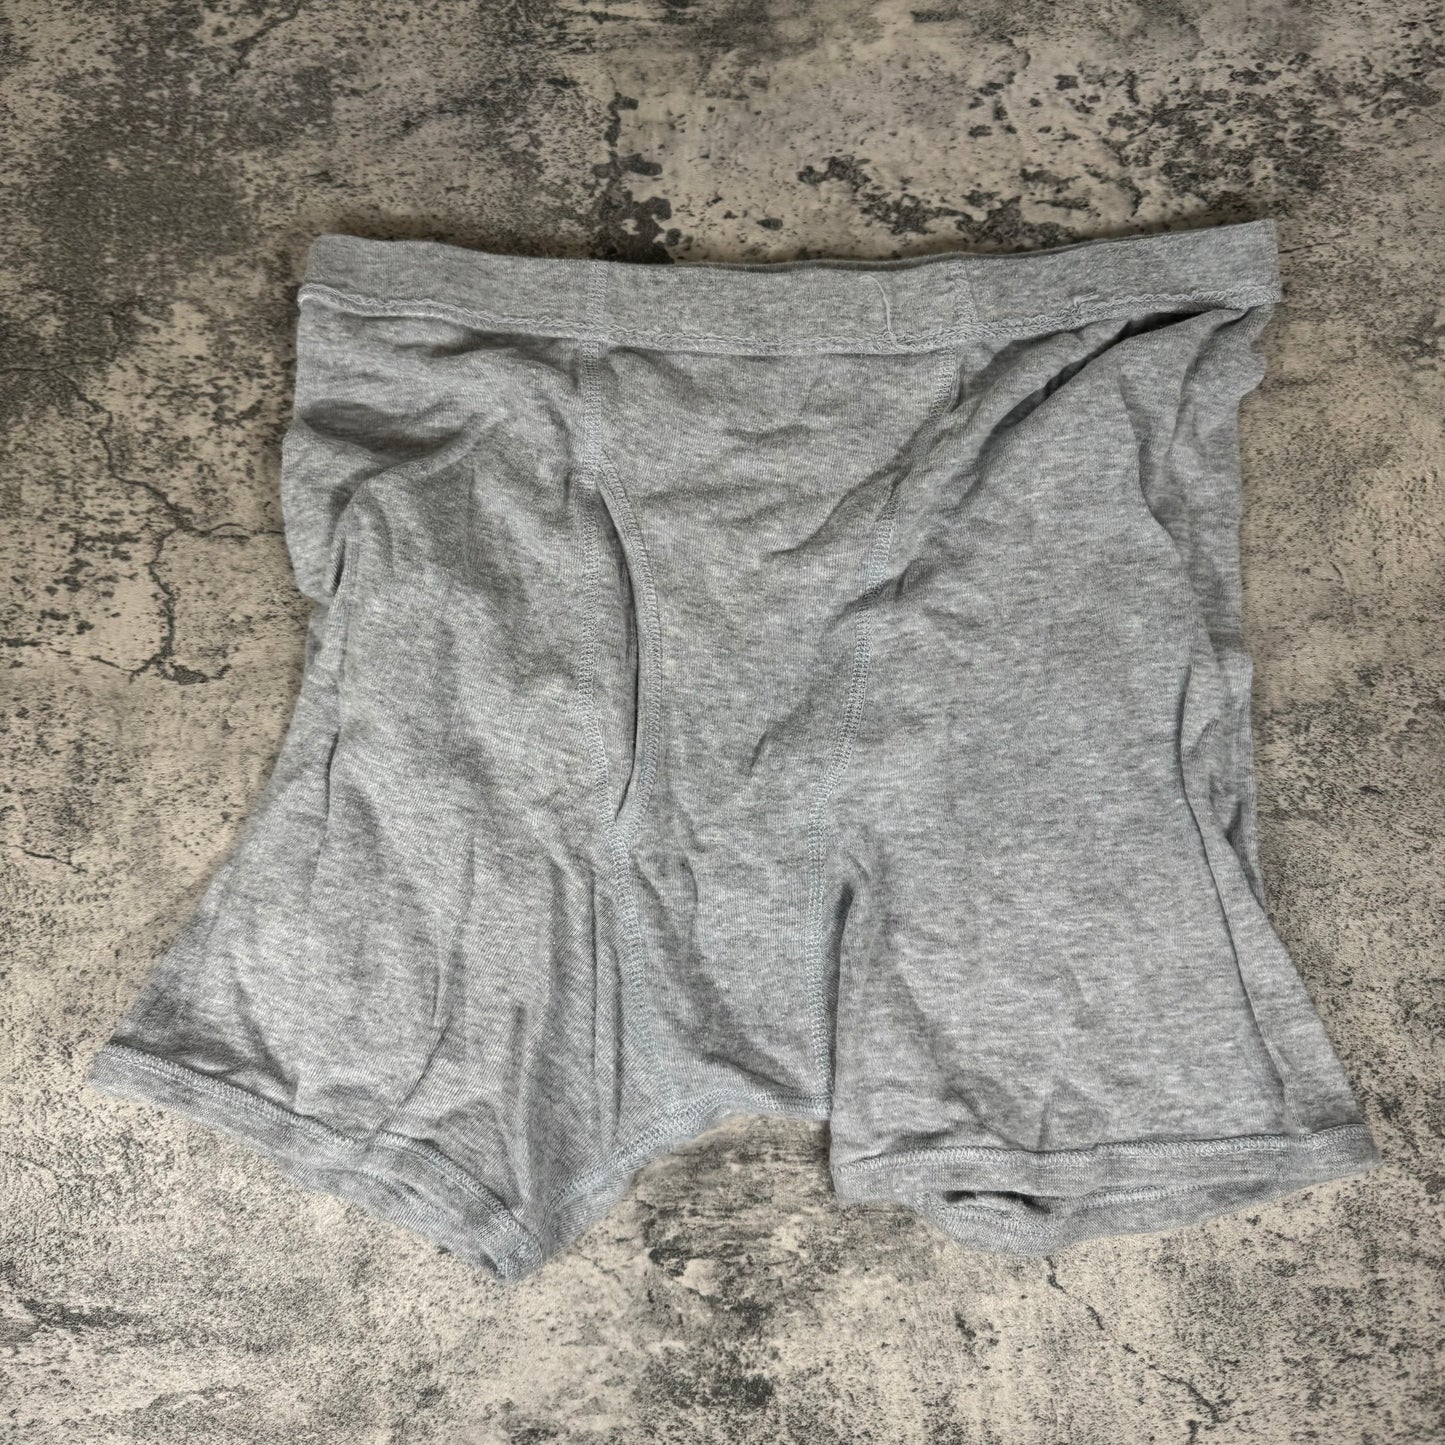 Vintage Gym tights/support shorts in MEDIUM & LARGE. From Robert’s personal gym/athletic/sports collection. PLEASE CHOOSE COLOR BELOW. ⬇️ 🩲💪🏼